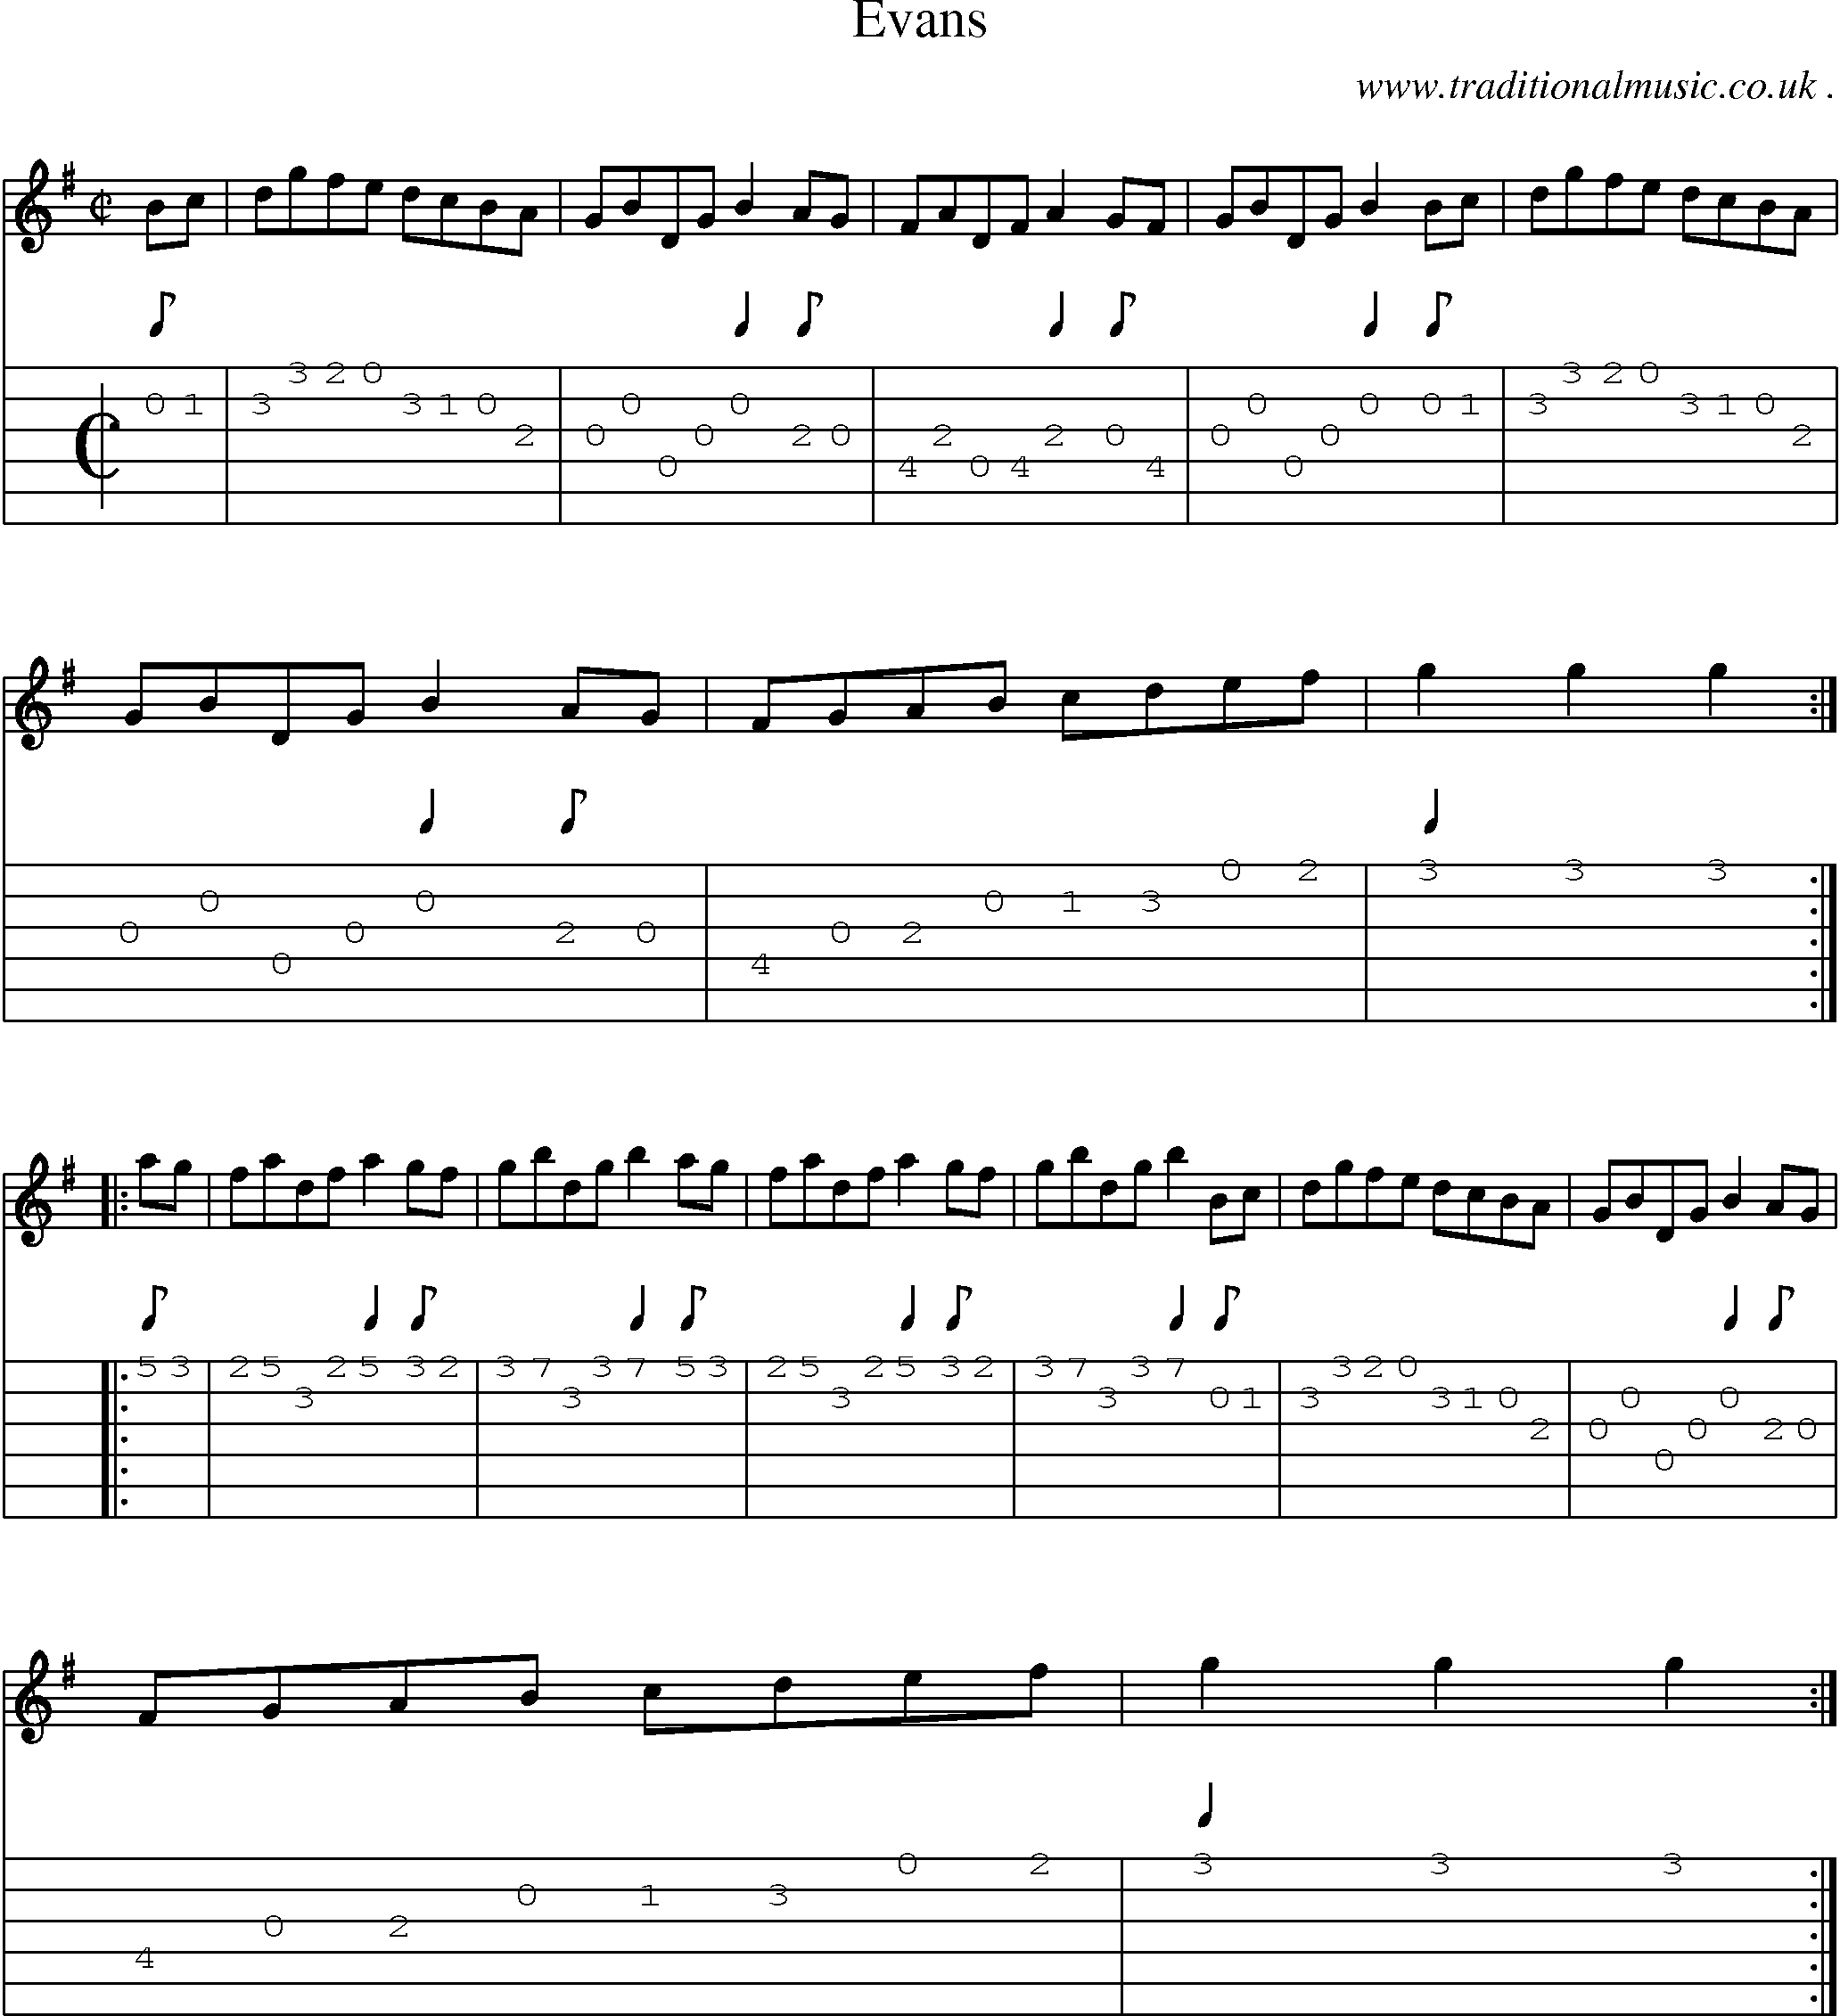 Sheet-music  score, Chords and Guitar Tabs for Evans